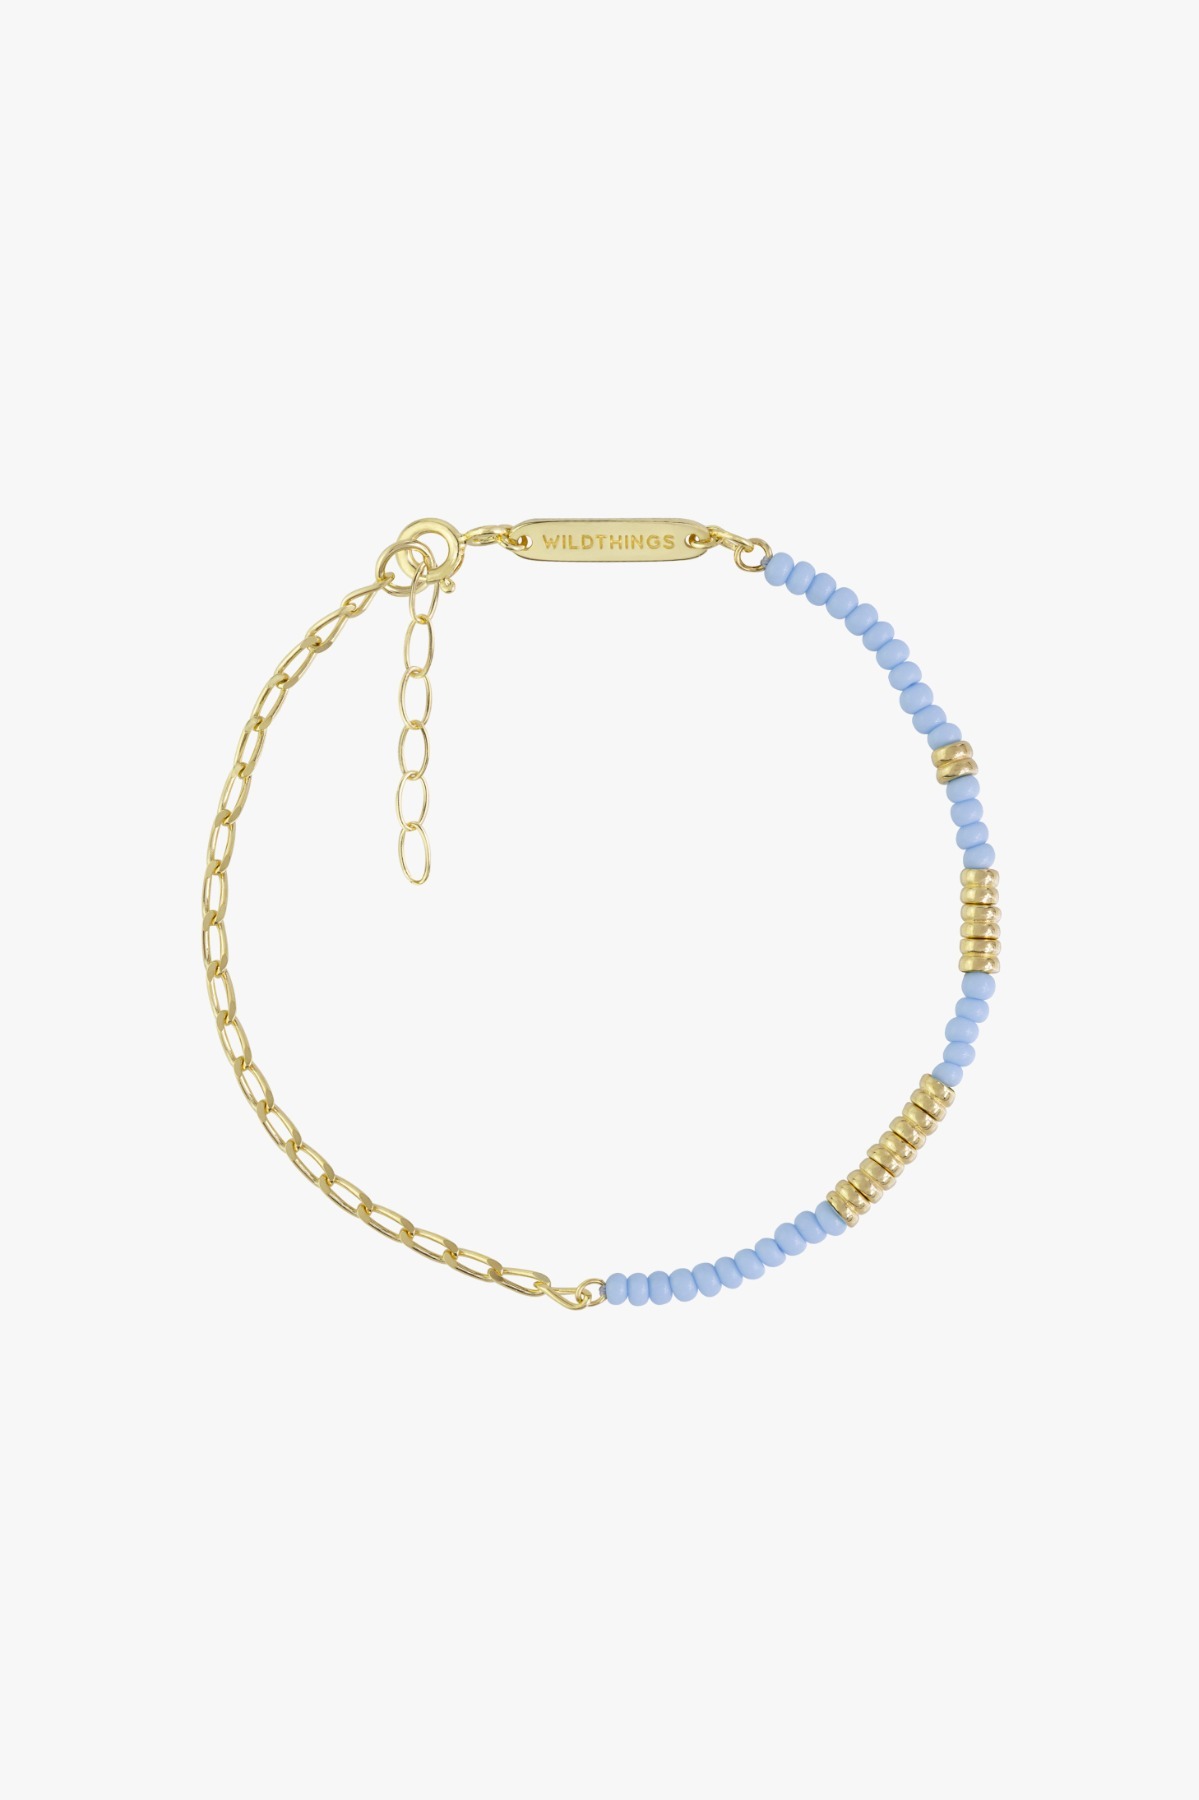 wildthings collectables - Think twice chain bracelet blue gold plated